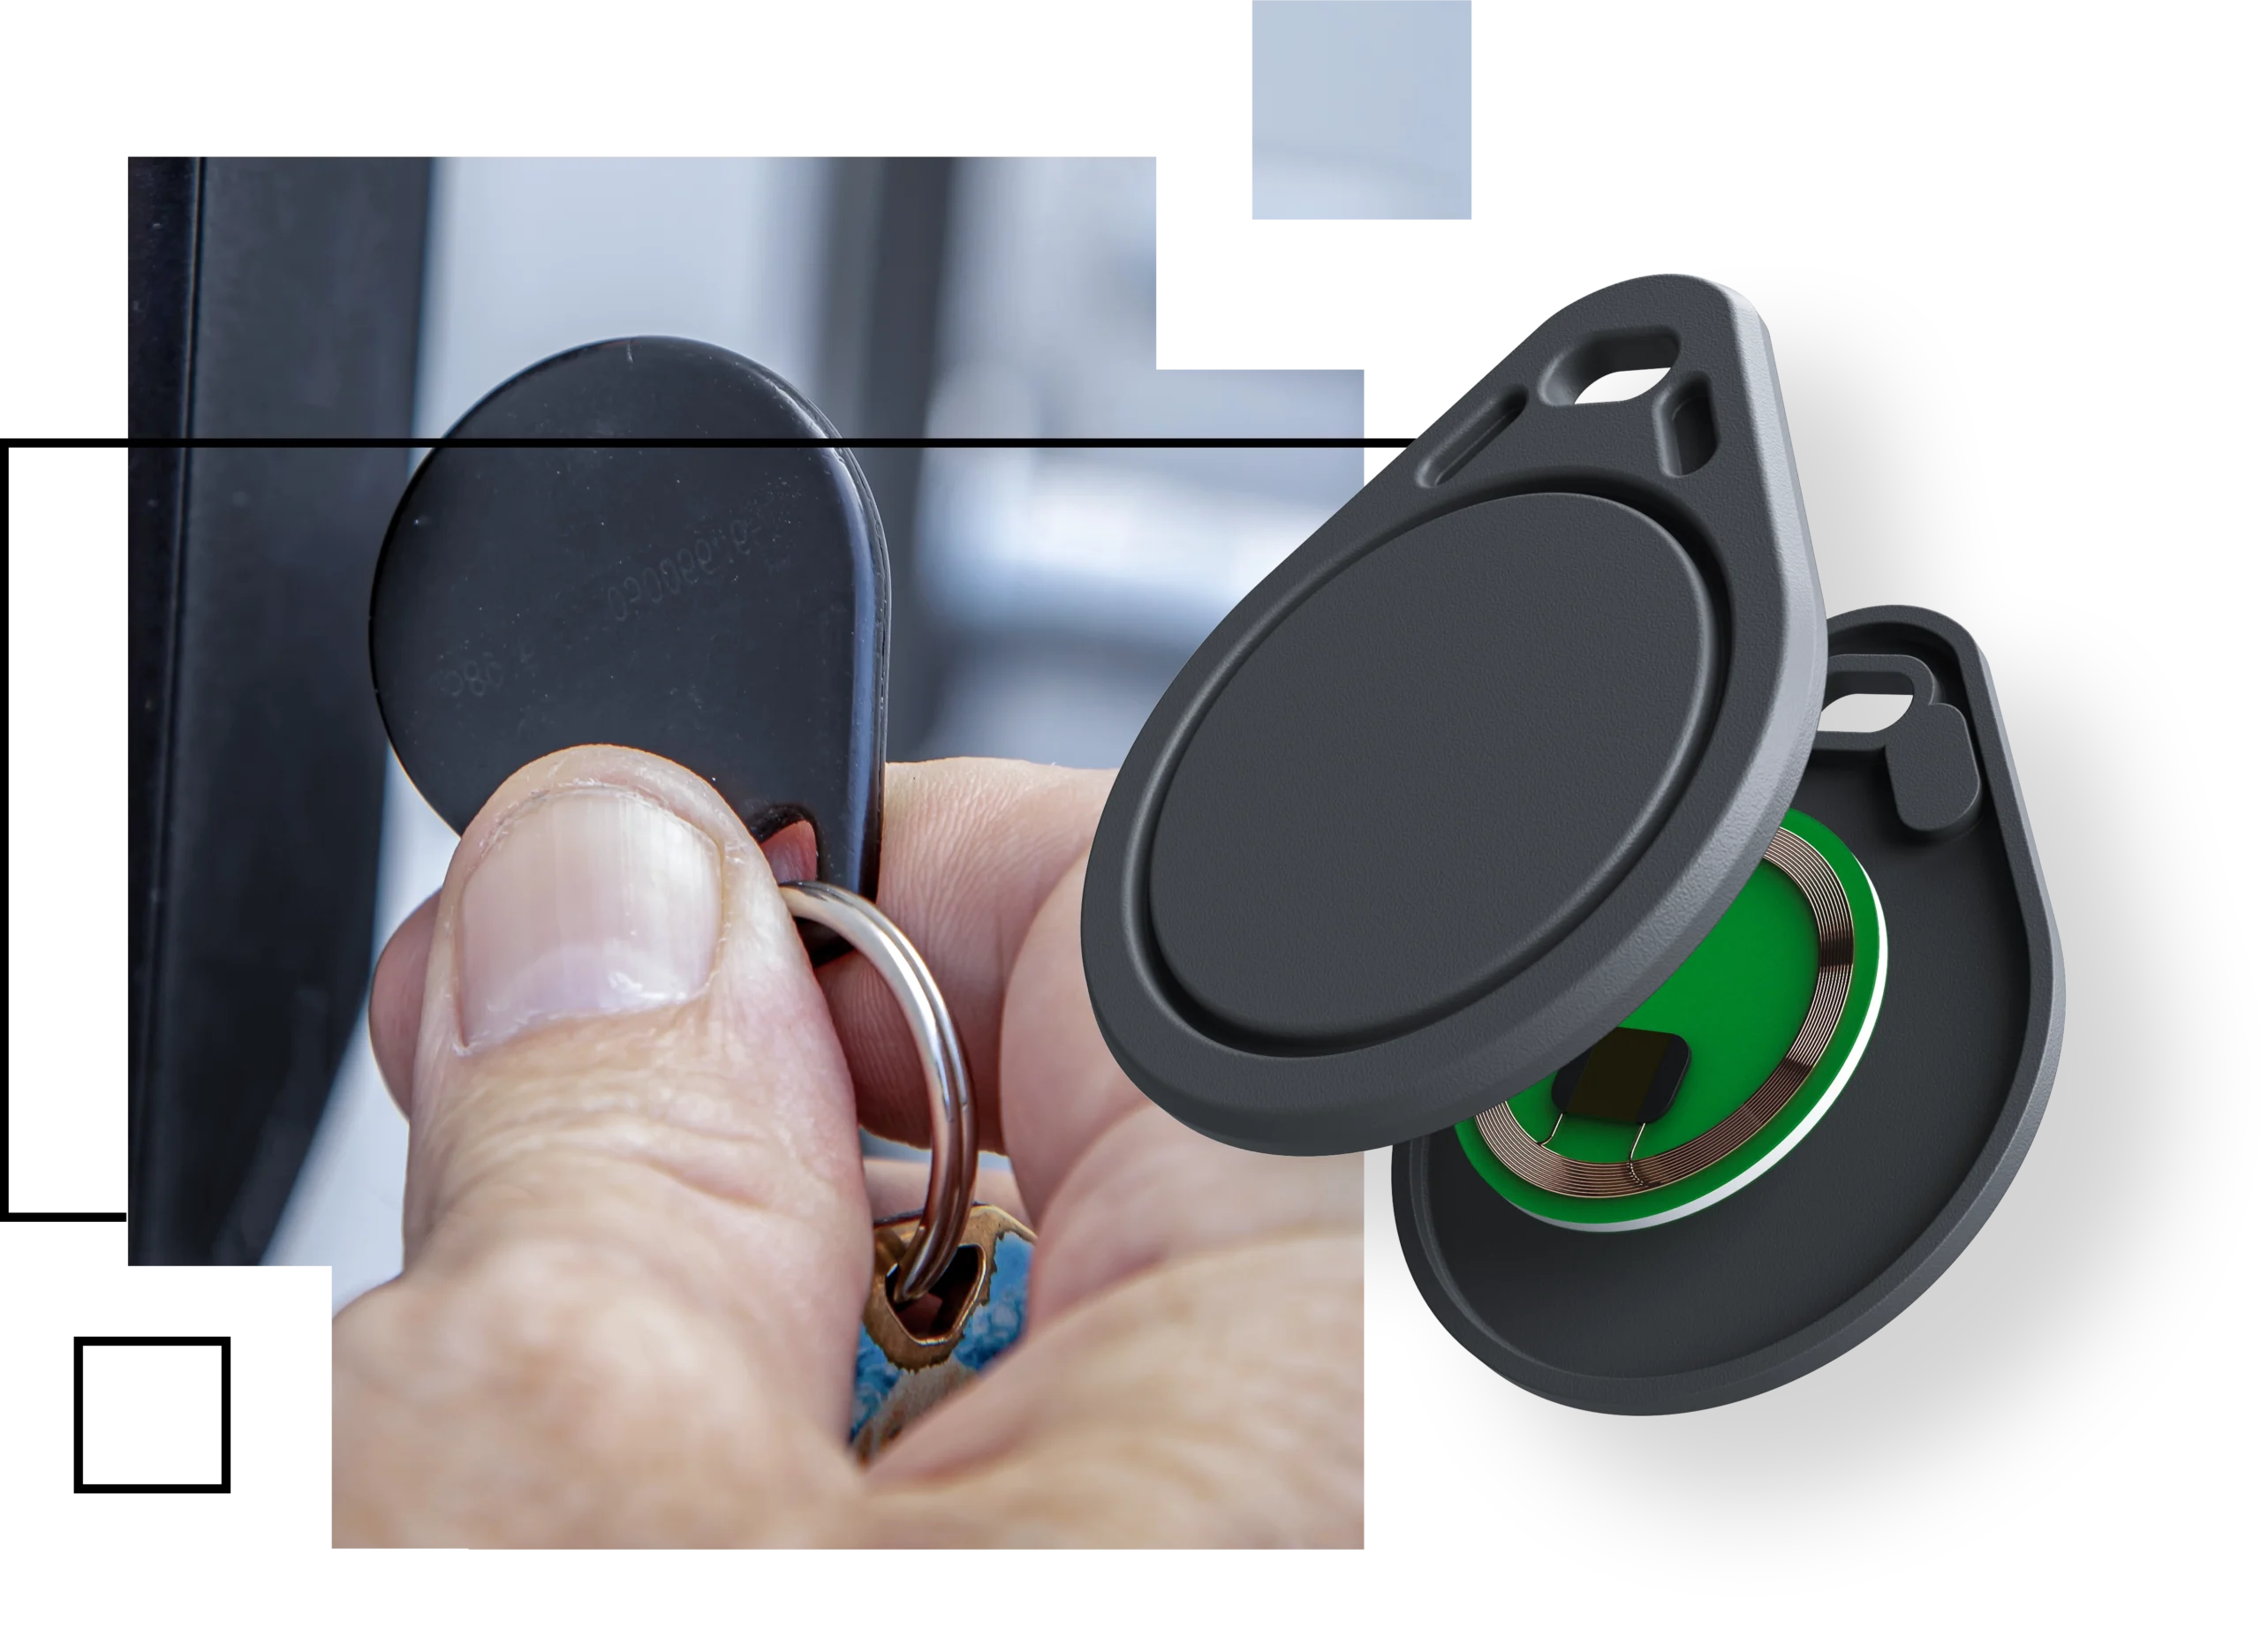 Silone develops a full range of RFID Fobs, or Key-Fobs which are integral in various sectors for identity-related applications, including access control, healthcare, banking for secure transactions, offering enhanced security and efficiency across industries.